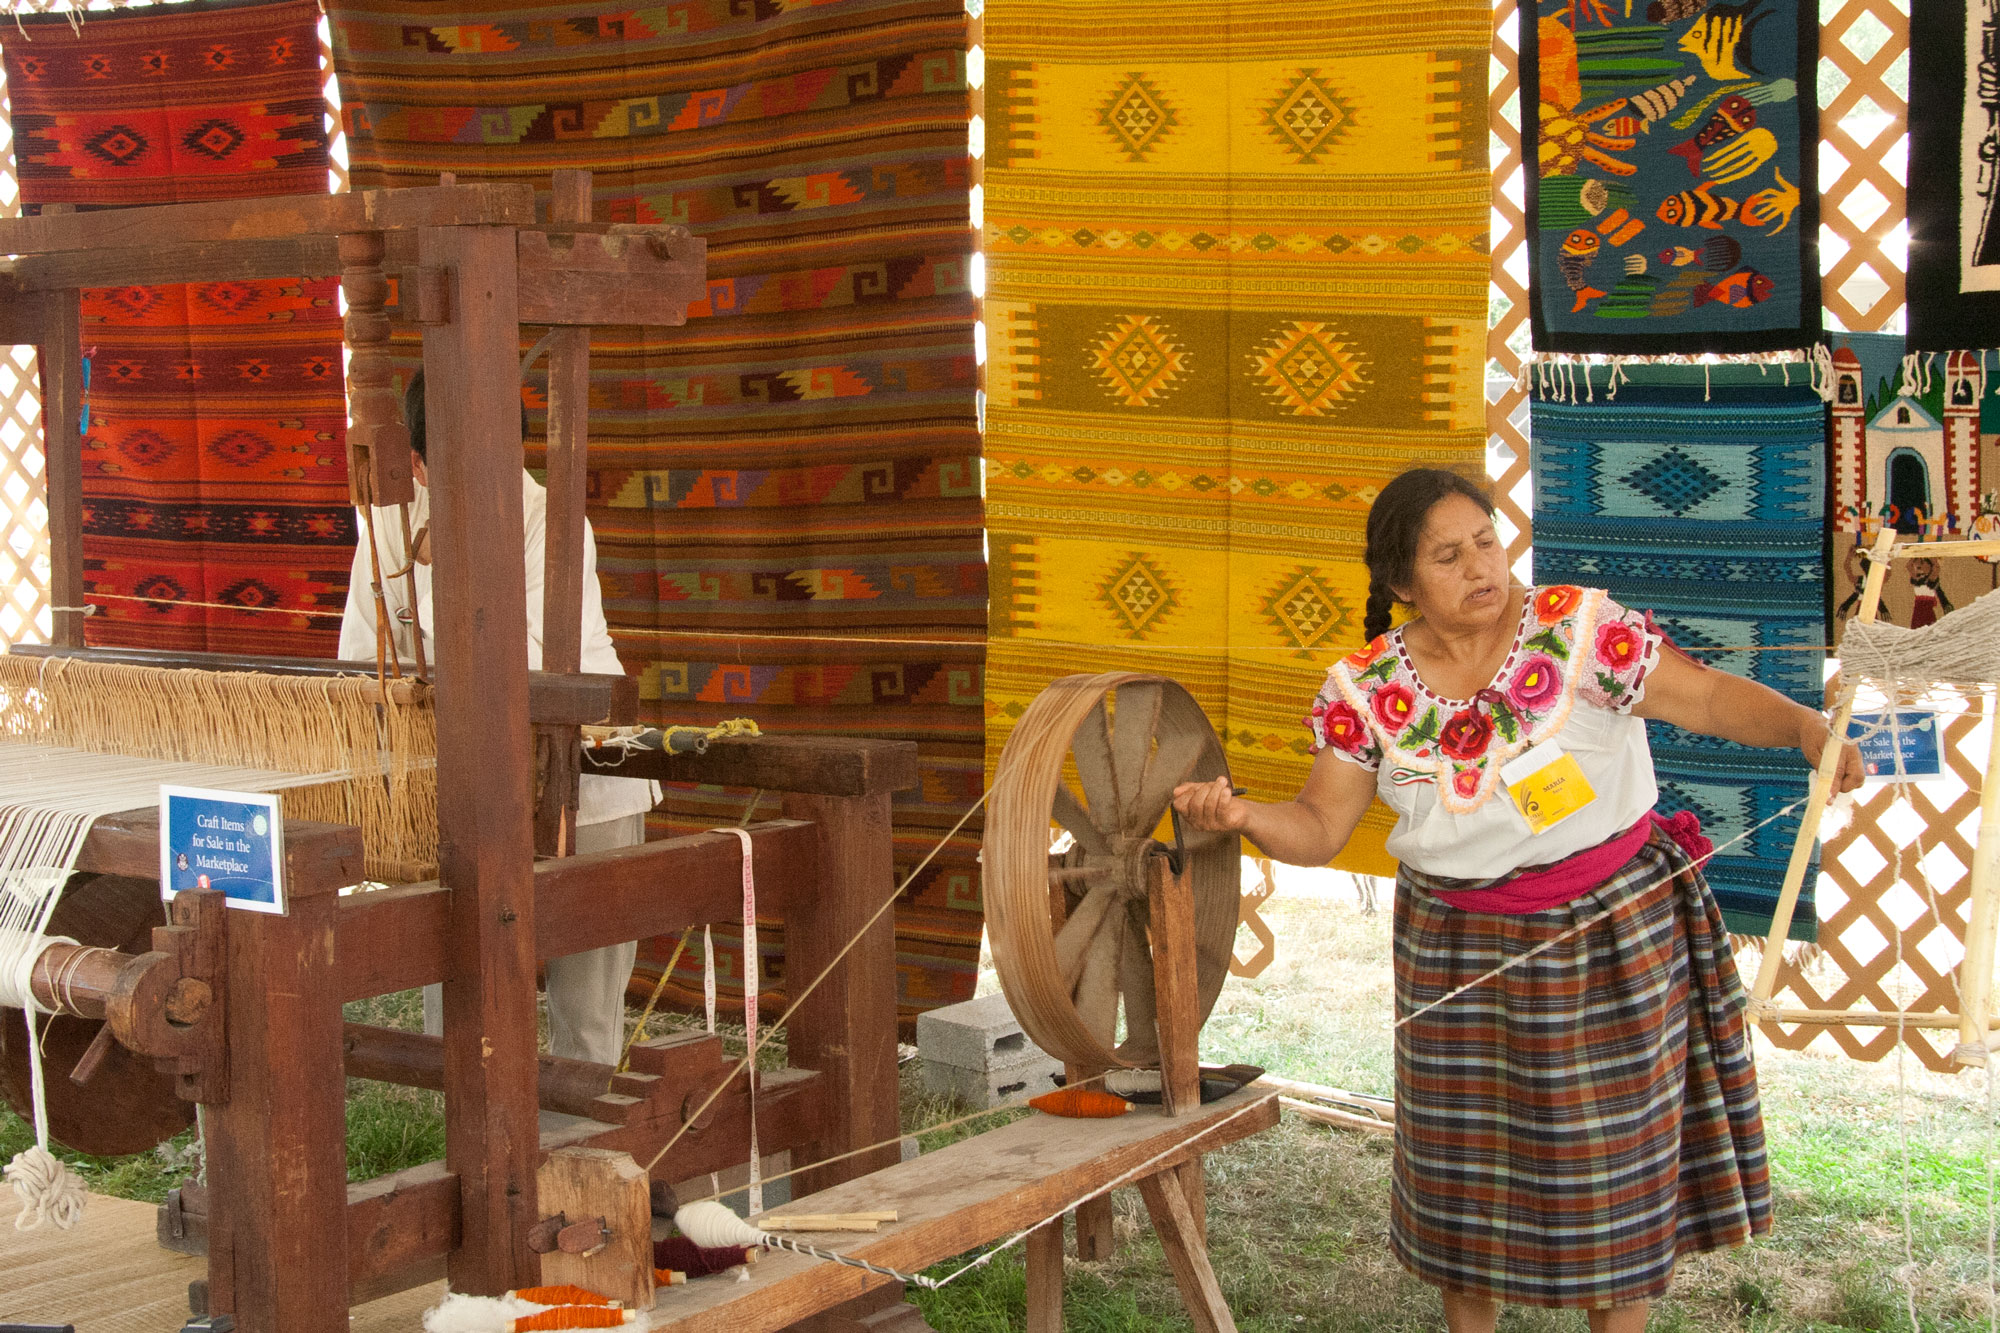 An older woman with dark hair in braids, wearing a traditional Mexican embroidered shirt and plaid skirt, holds wool she is spinning at a spinning wheel. Behind her are brightly colored, woven rugs she and her family have made.